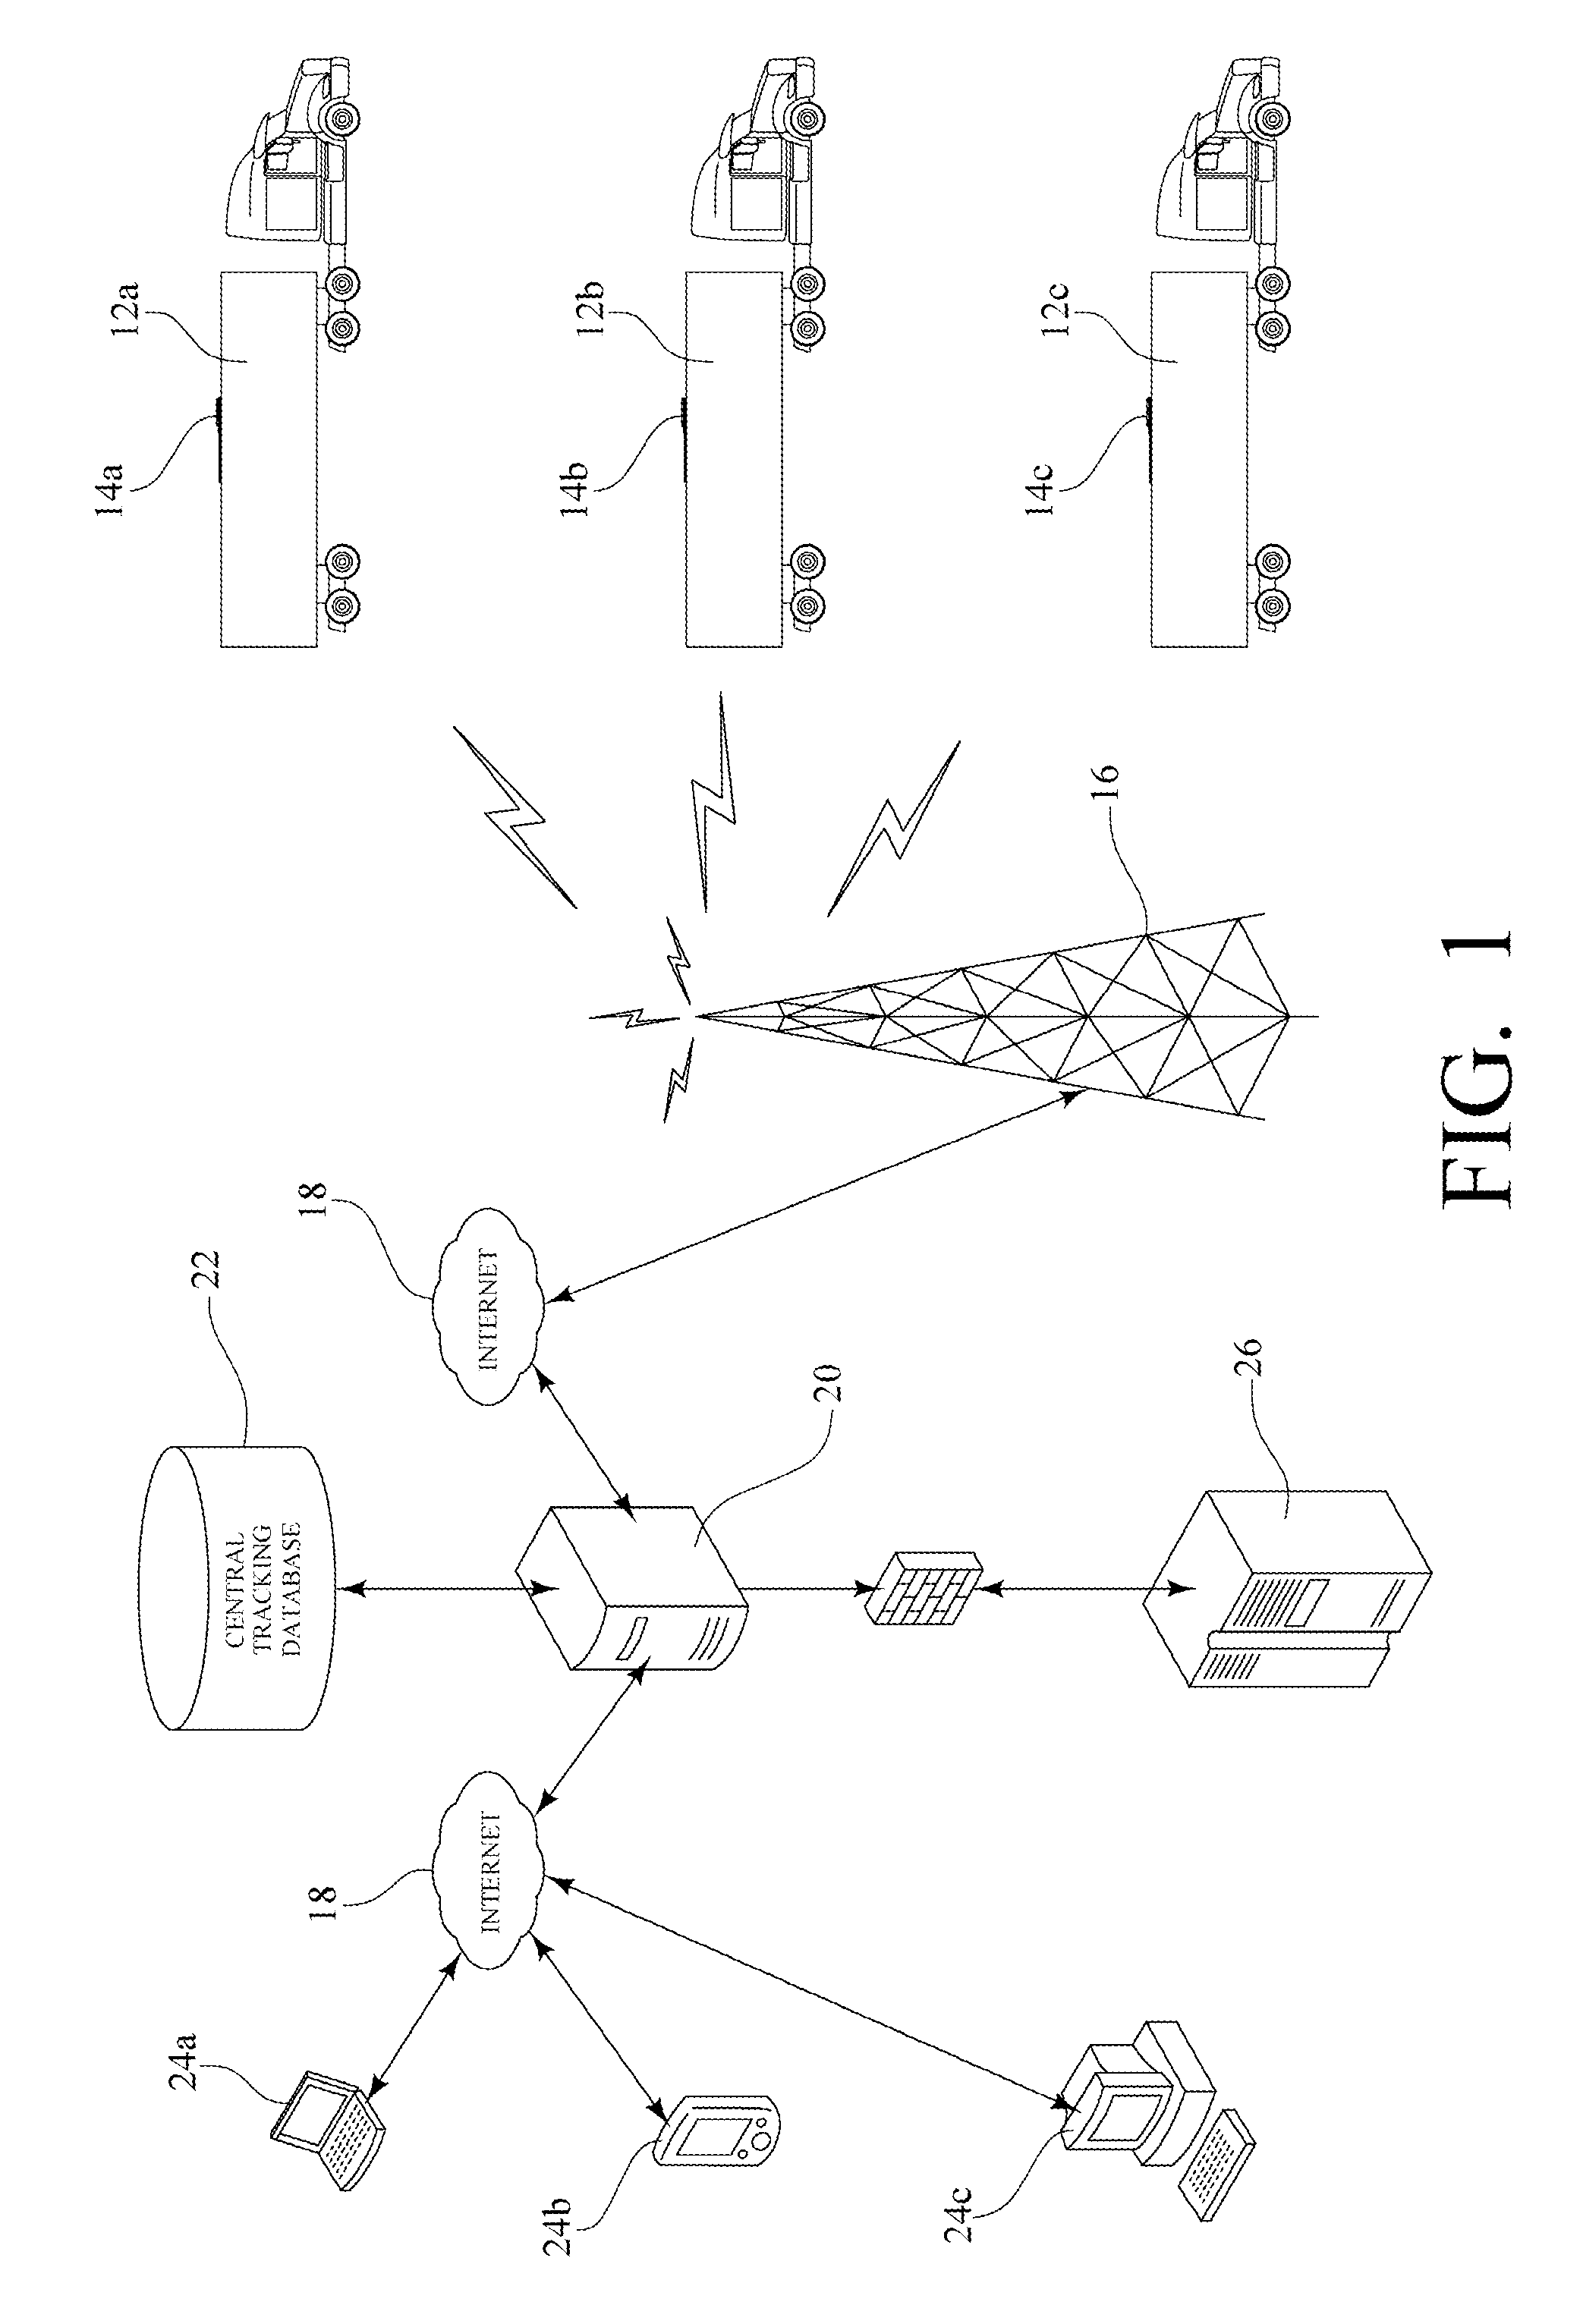 Device, system and method for tracking mobile assets